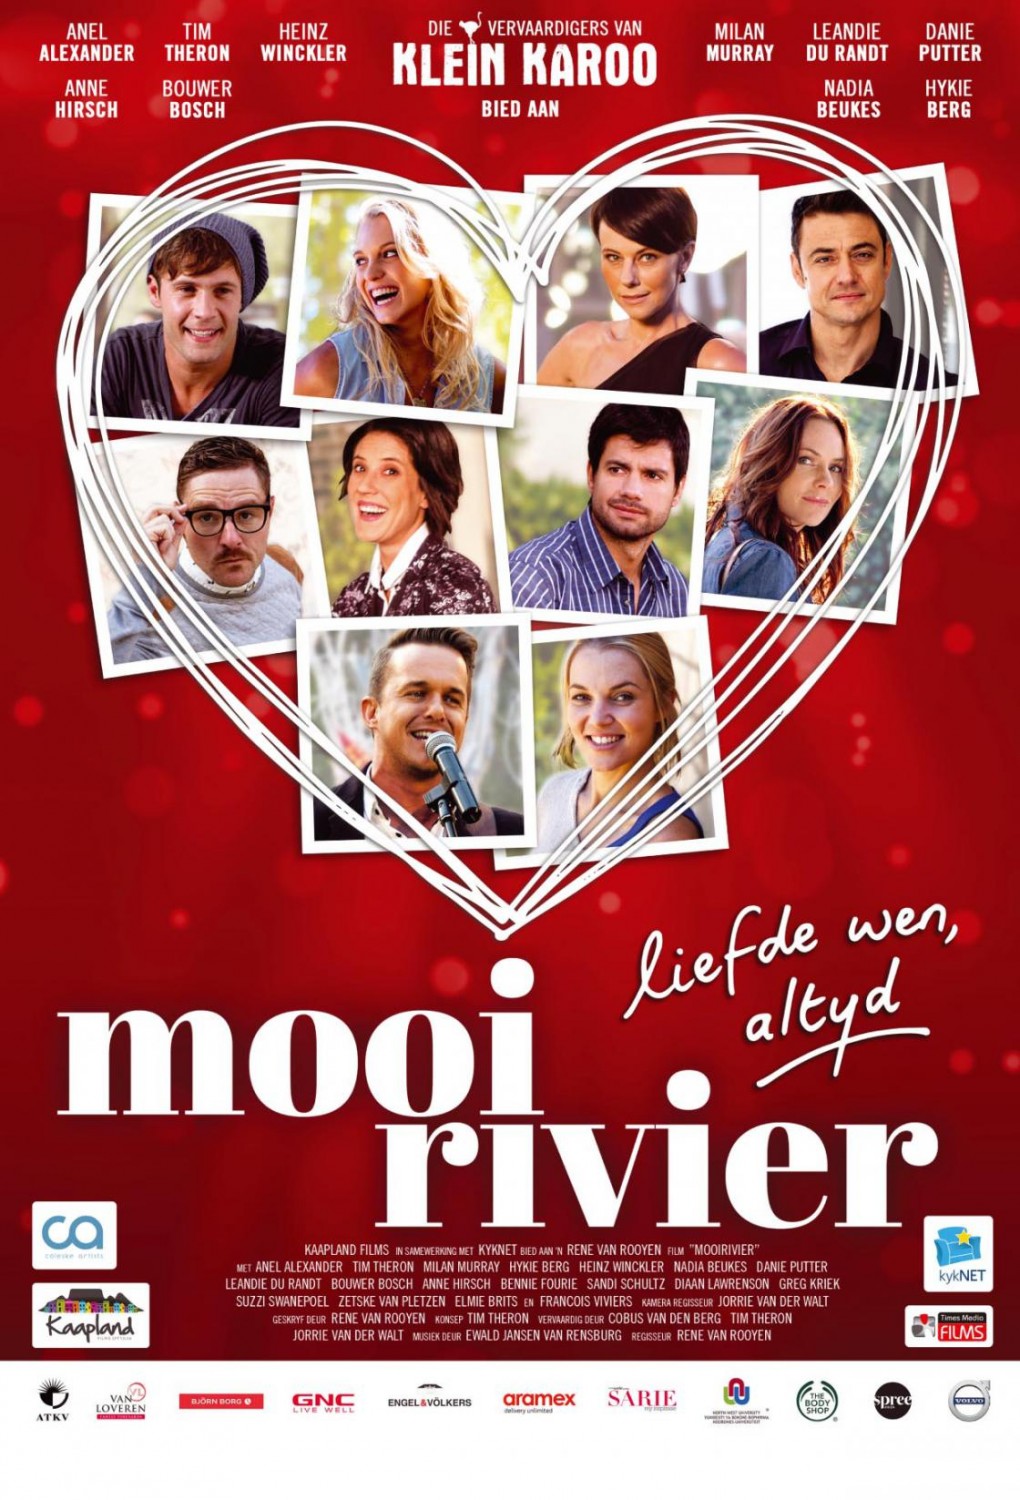 Extra Large Movie Poster Image for Mooirivier 